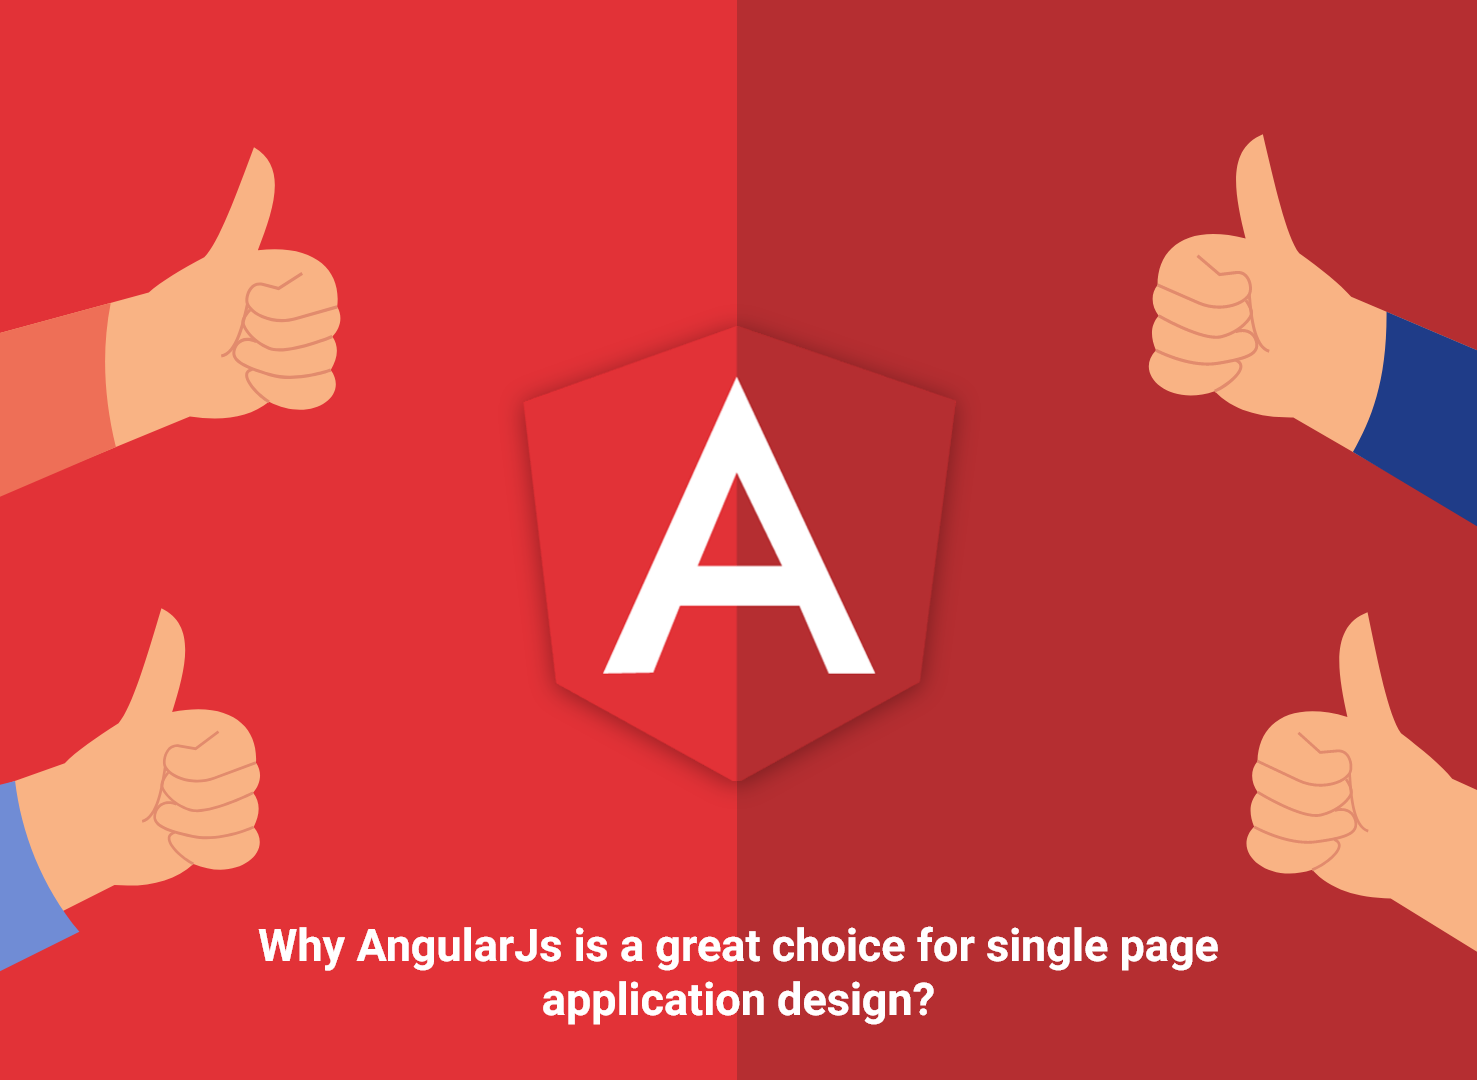 Why angular.js is a great choice for single page application design?